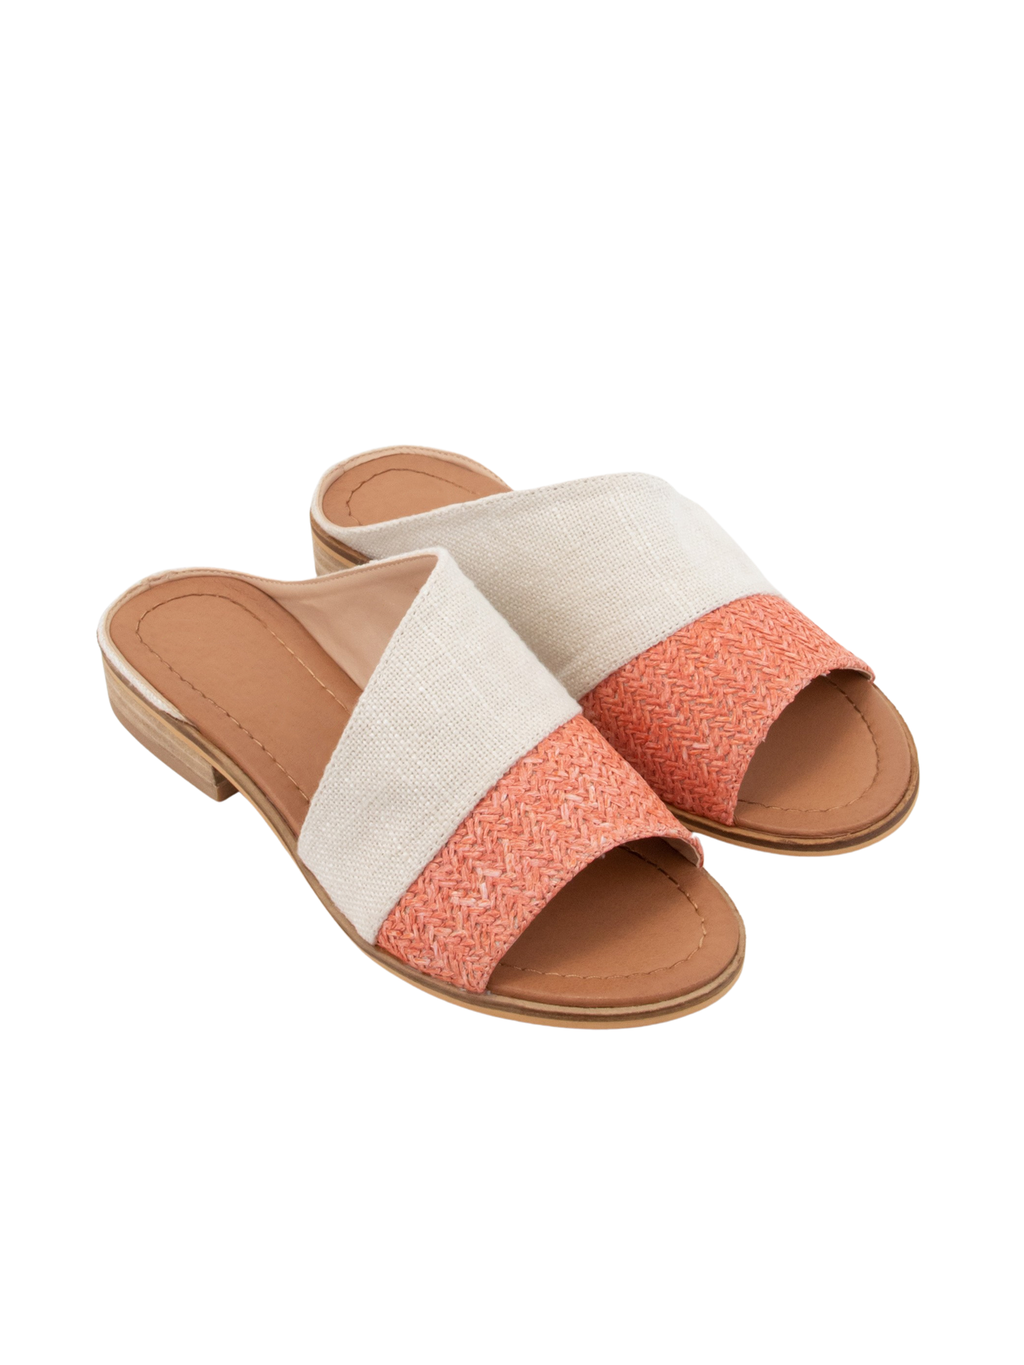 Bambi Two Tone Slide in Coral